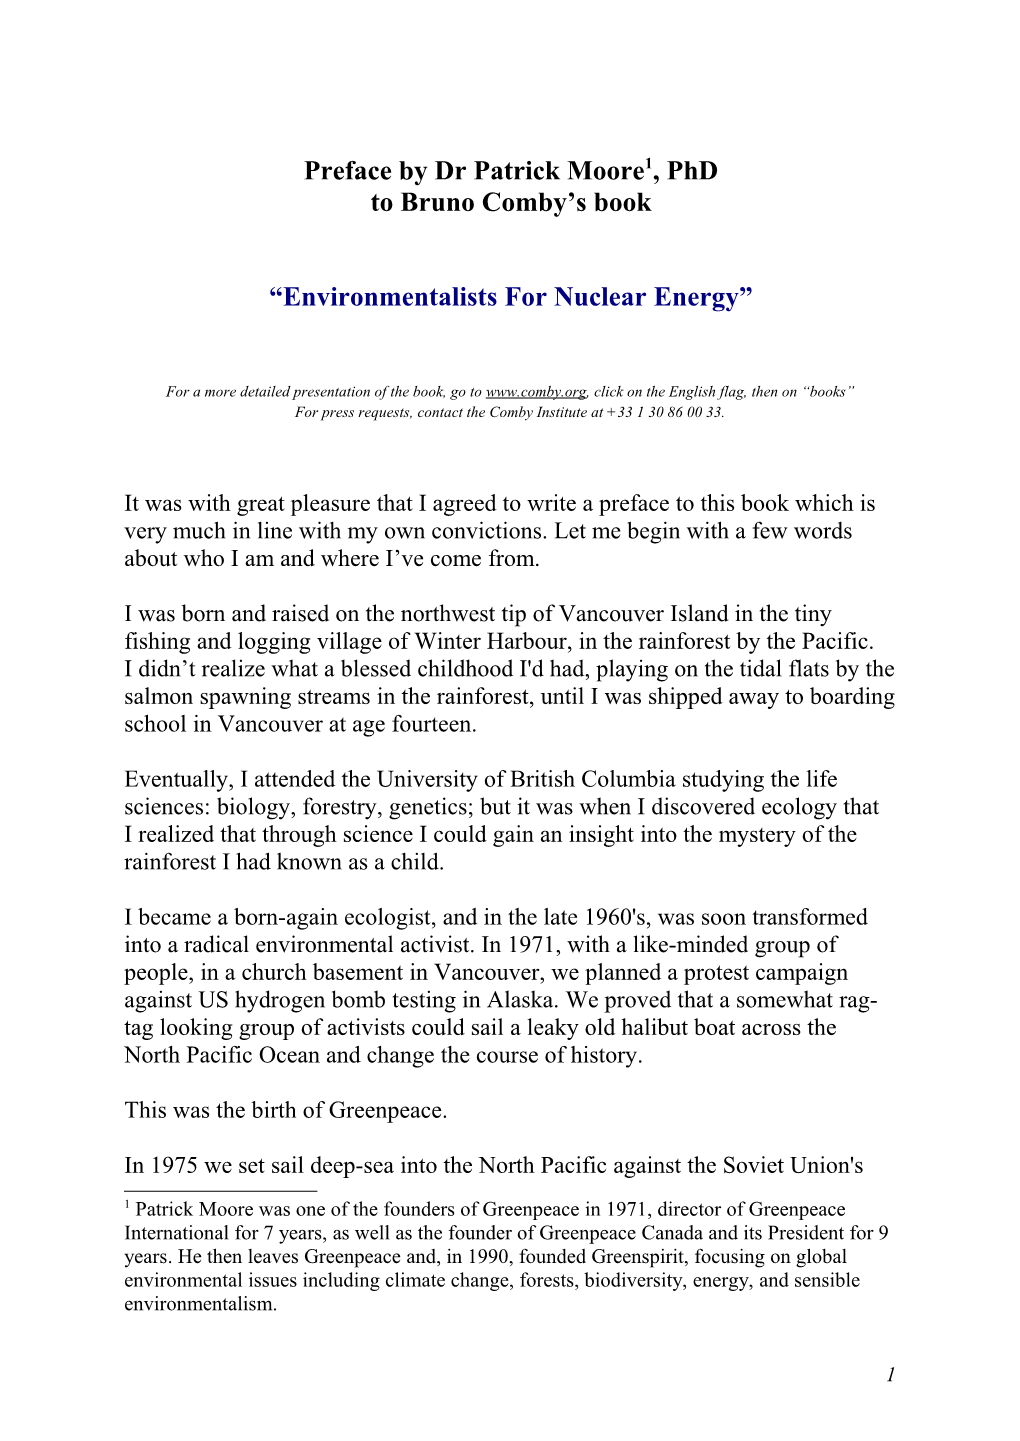 Preface to the Book Environmentalists for Nuclear Energy